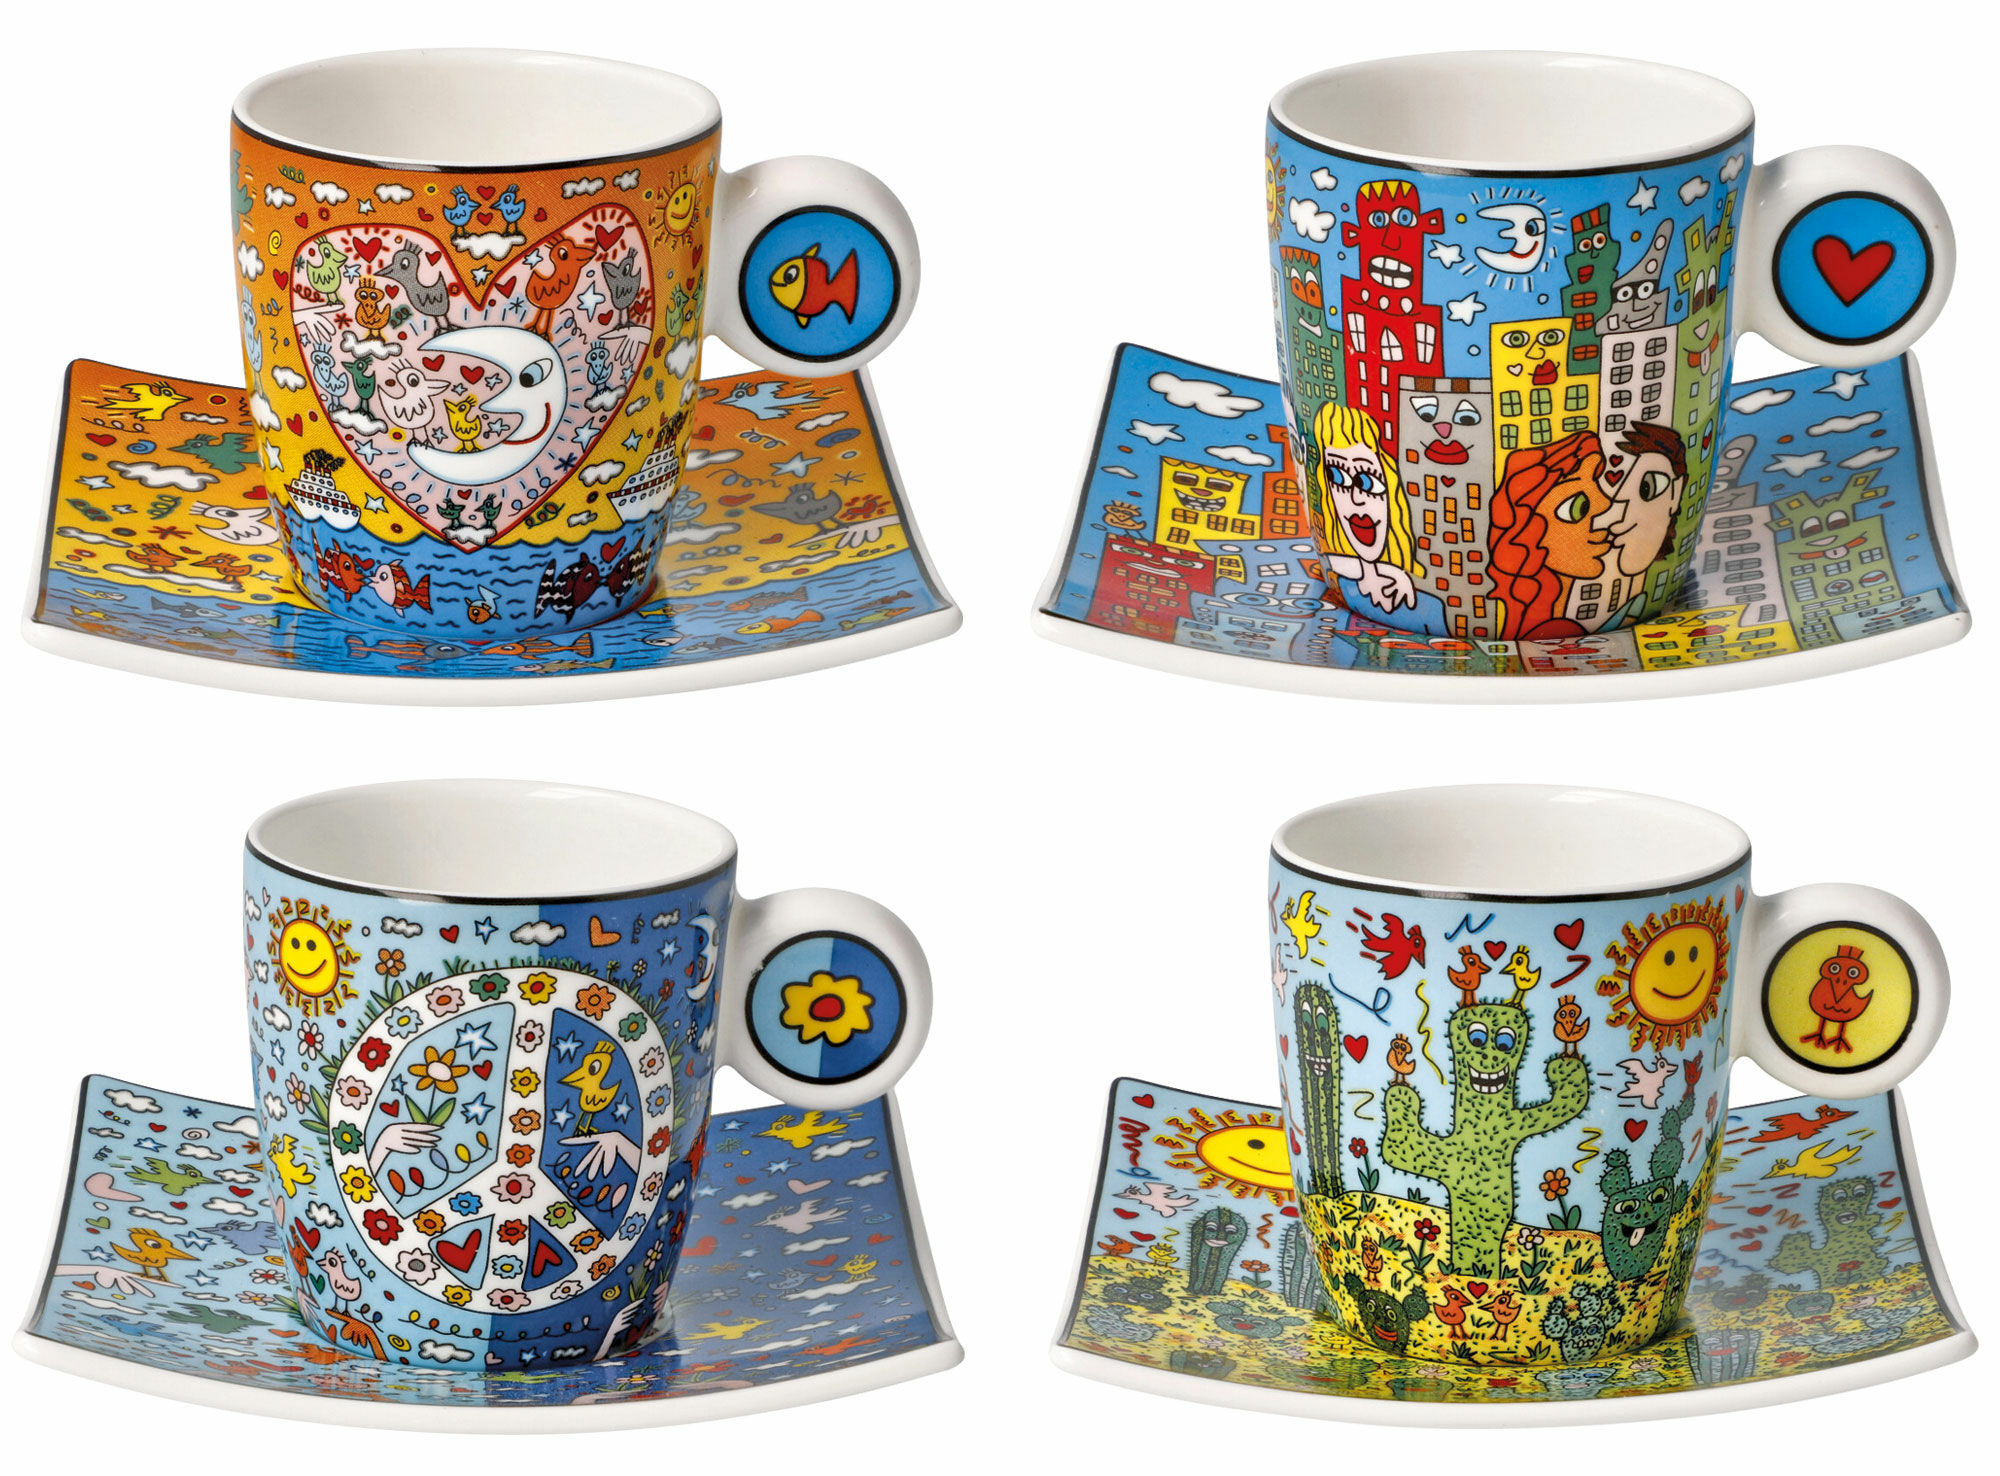 Set of 4 espresso cups with artist motifs, porcelain by James Rizzi